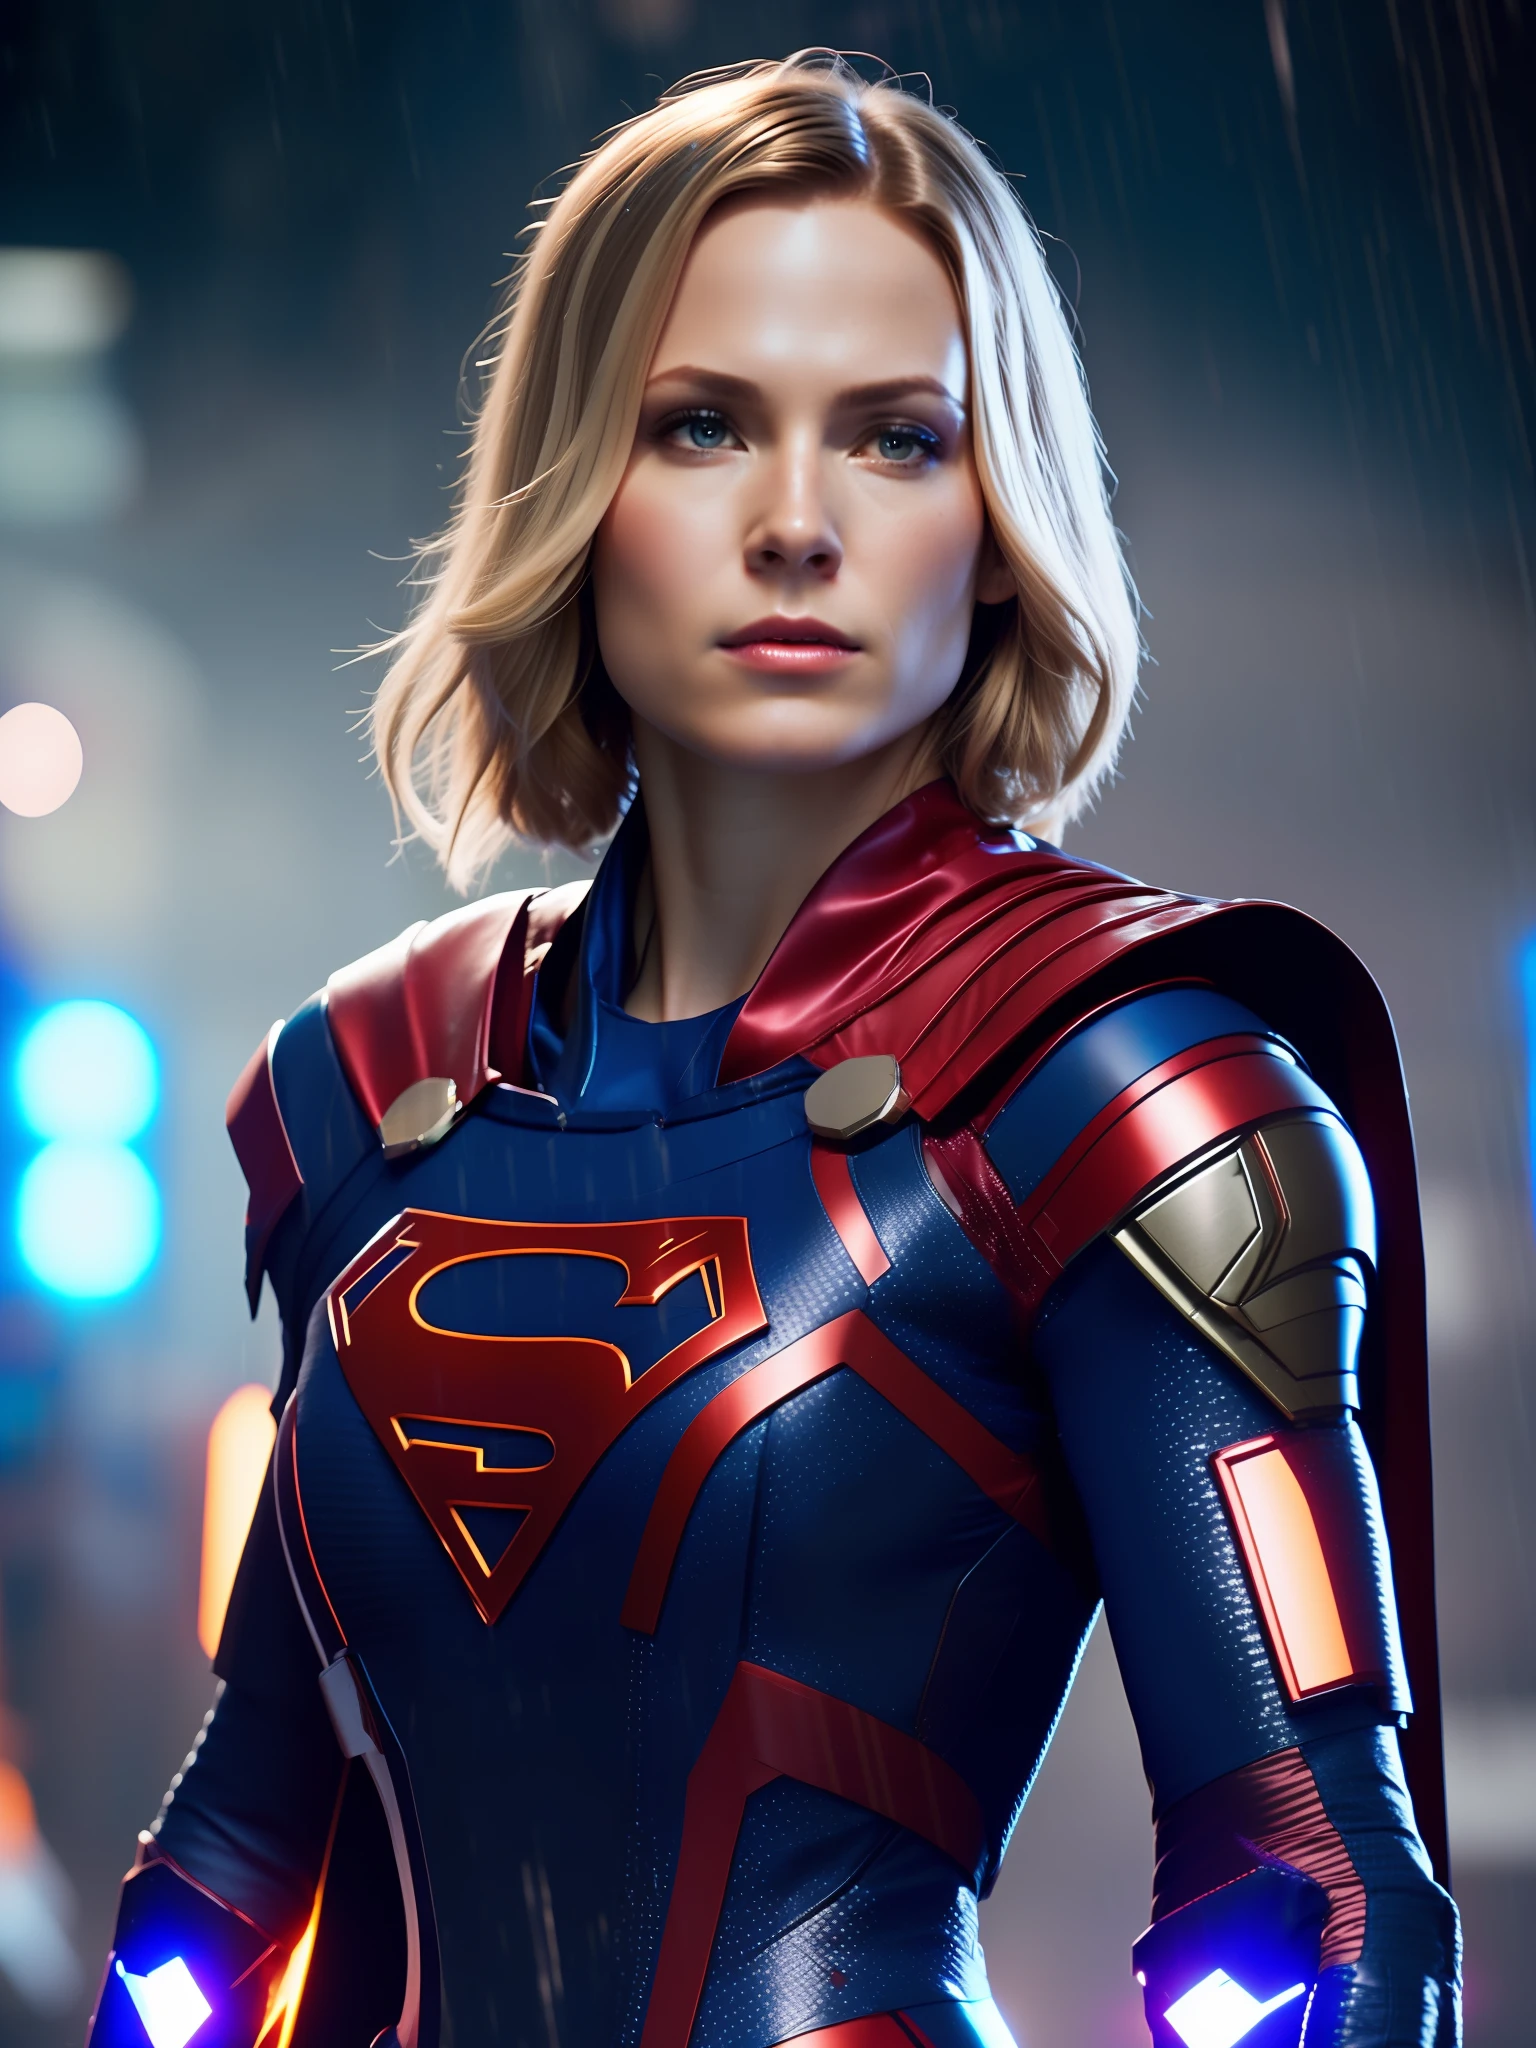 Female Supergirl award-winning photo of a woman, blue and red superhero suit, square jawline, asymmetric face, short hair, in rain, sad, purple light, 80mm, bokeh, mass effect, close up, fking_cinema_v2, 8k, cinematic